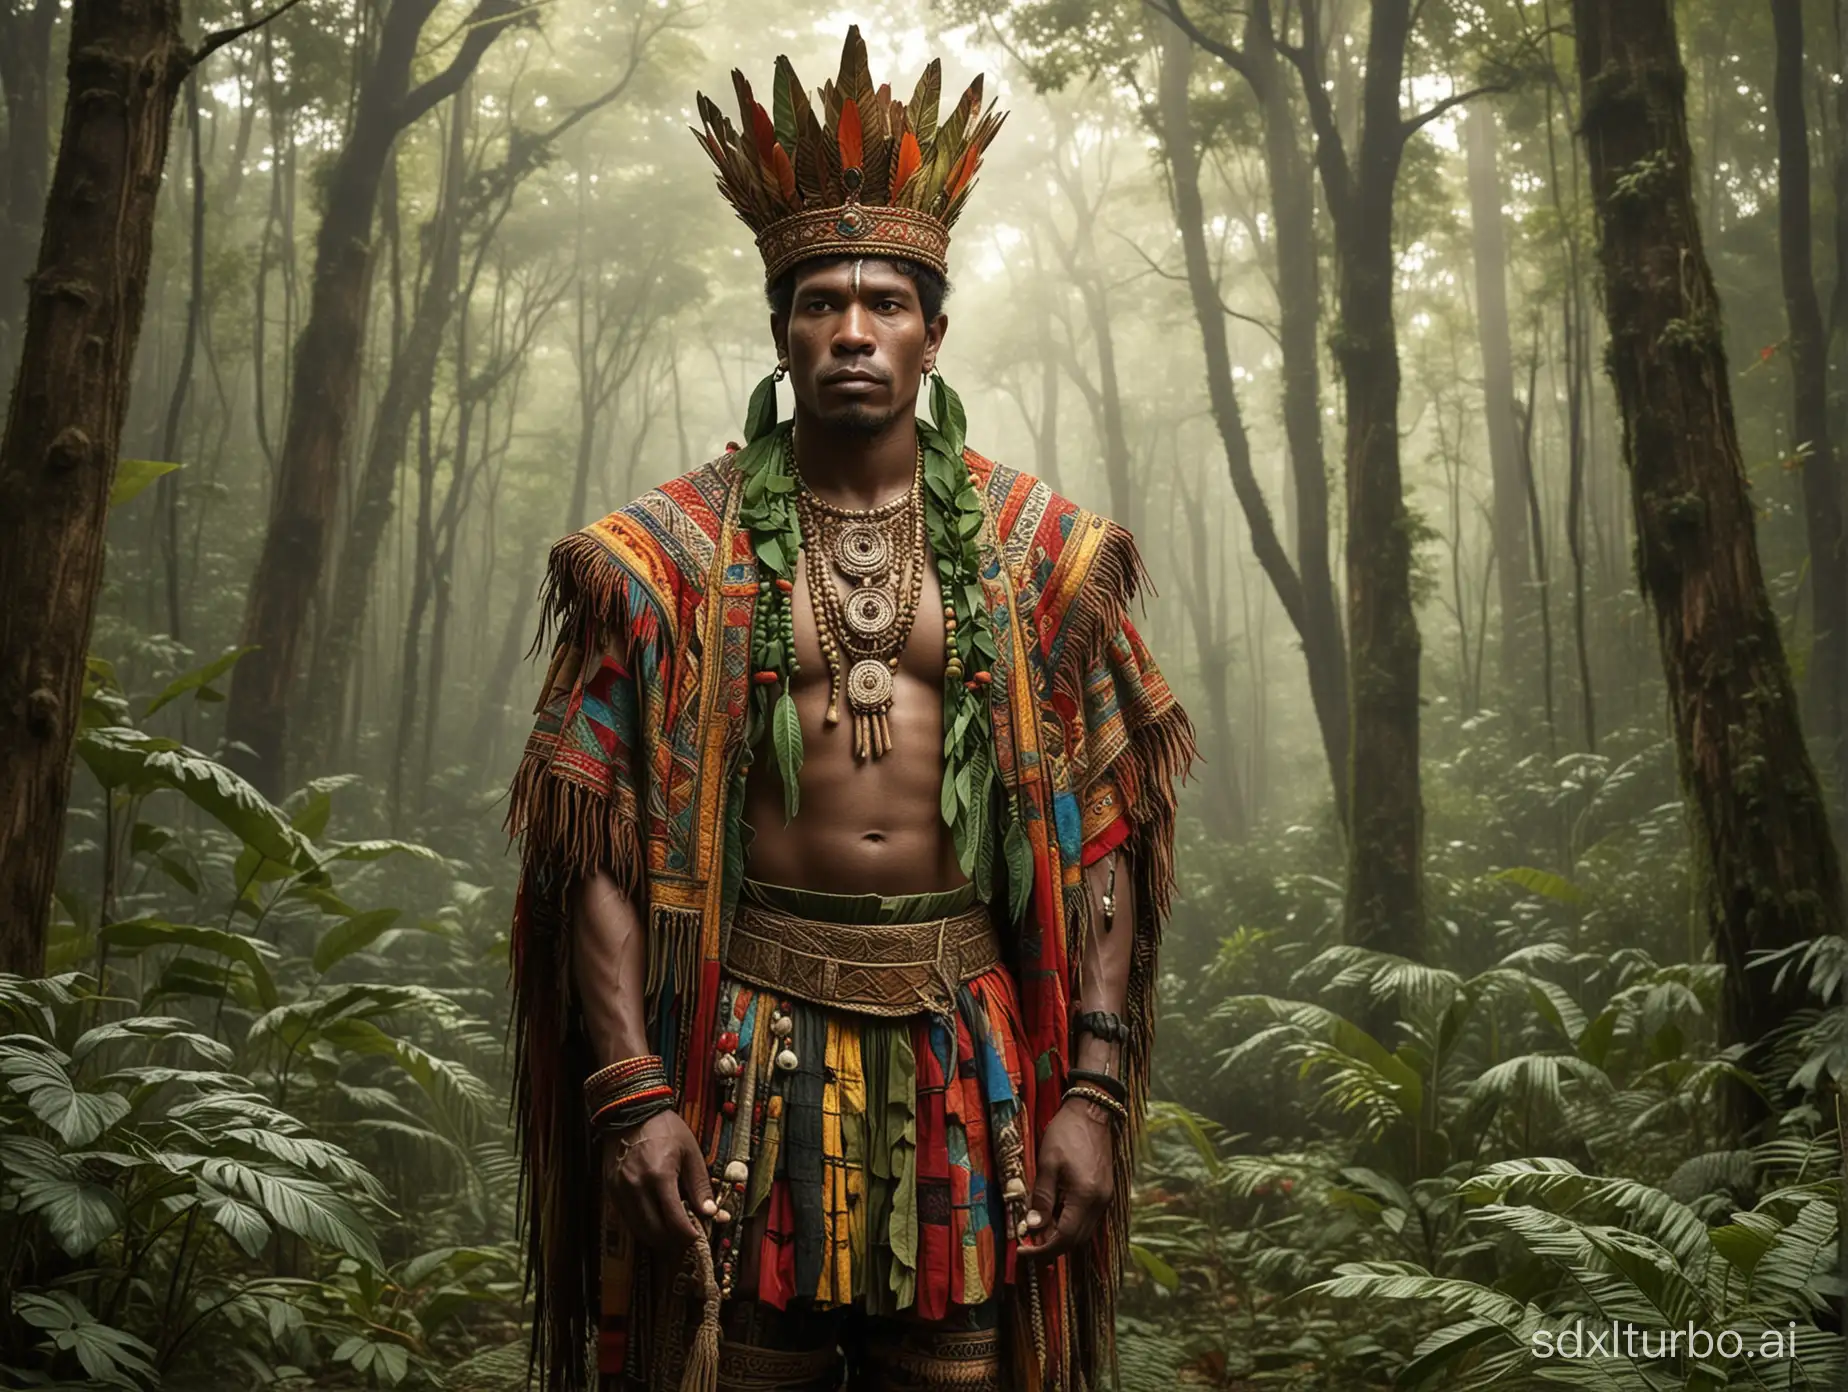 Quilombola-King-Malunguinho-Guardian-of-the-Forests-and-Catimb-Tradition